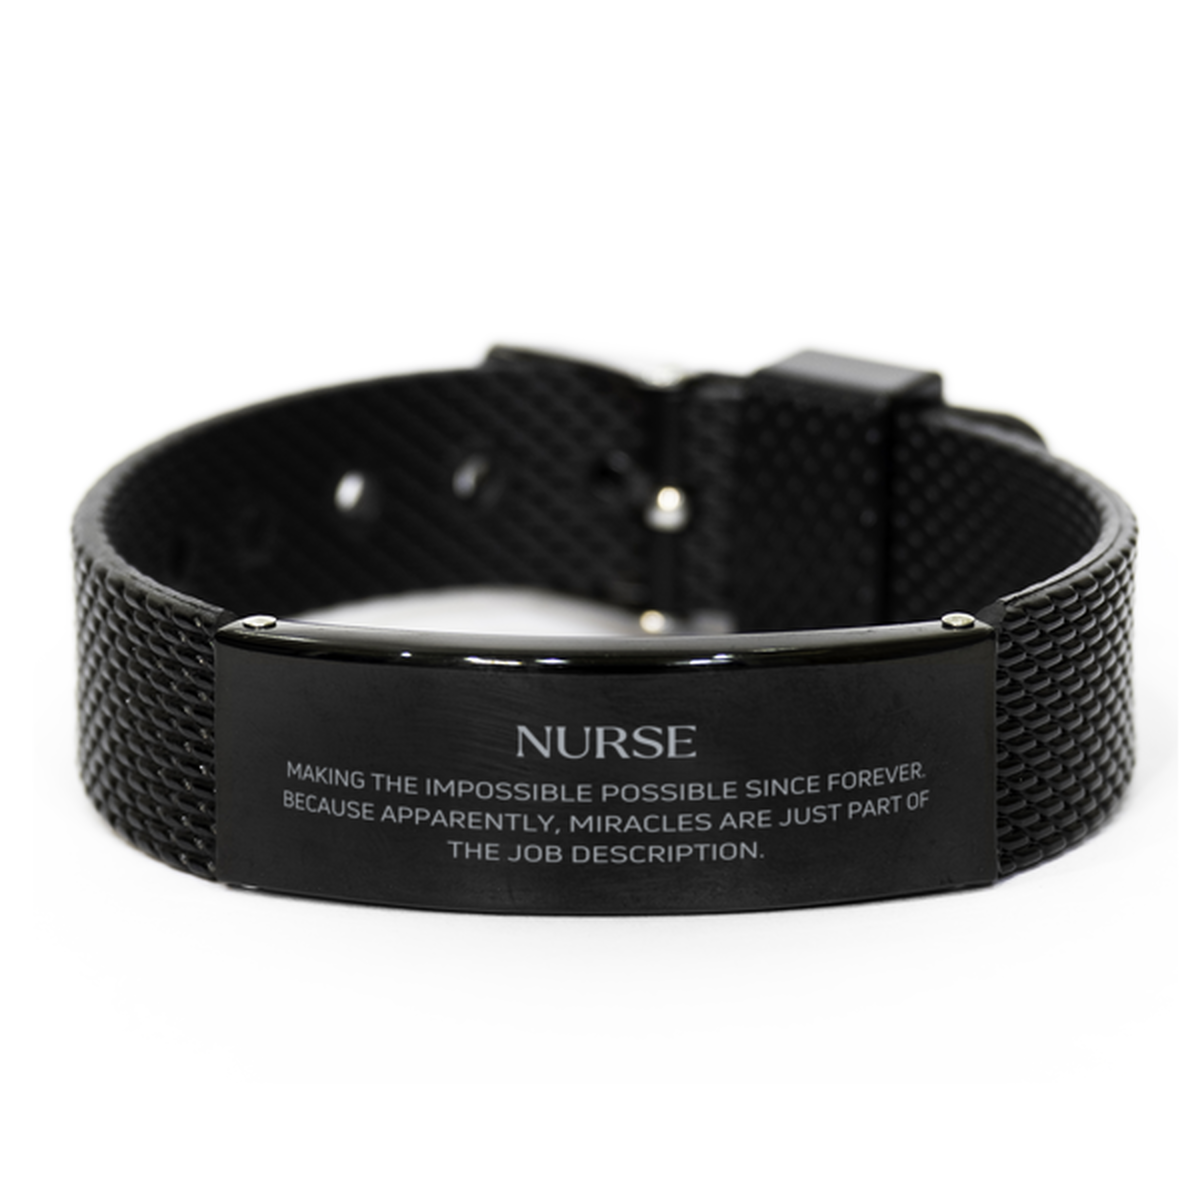 Funny Nurse Gifts, Miracles are just part of the job description, Inspirational Birthday Black Shark Mesh Bracelet For Nurse, Men, Women, Coworkers, Friends, Boss